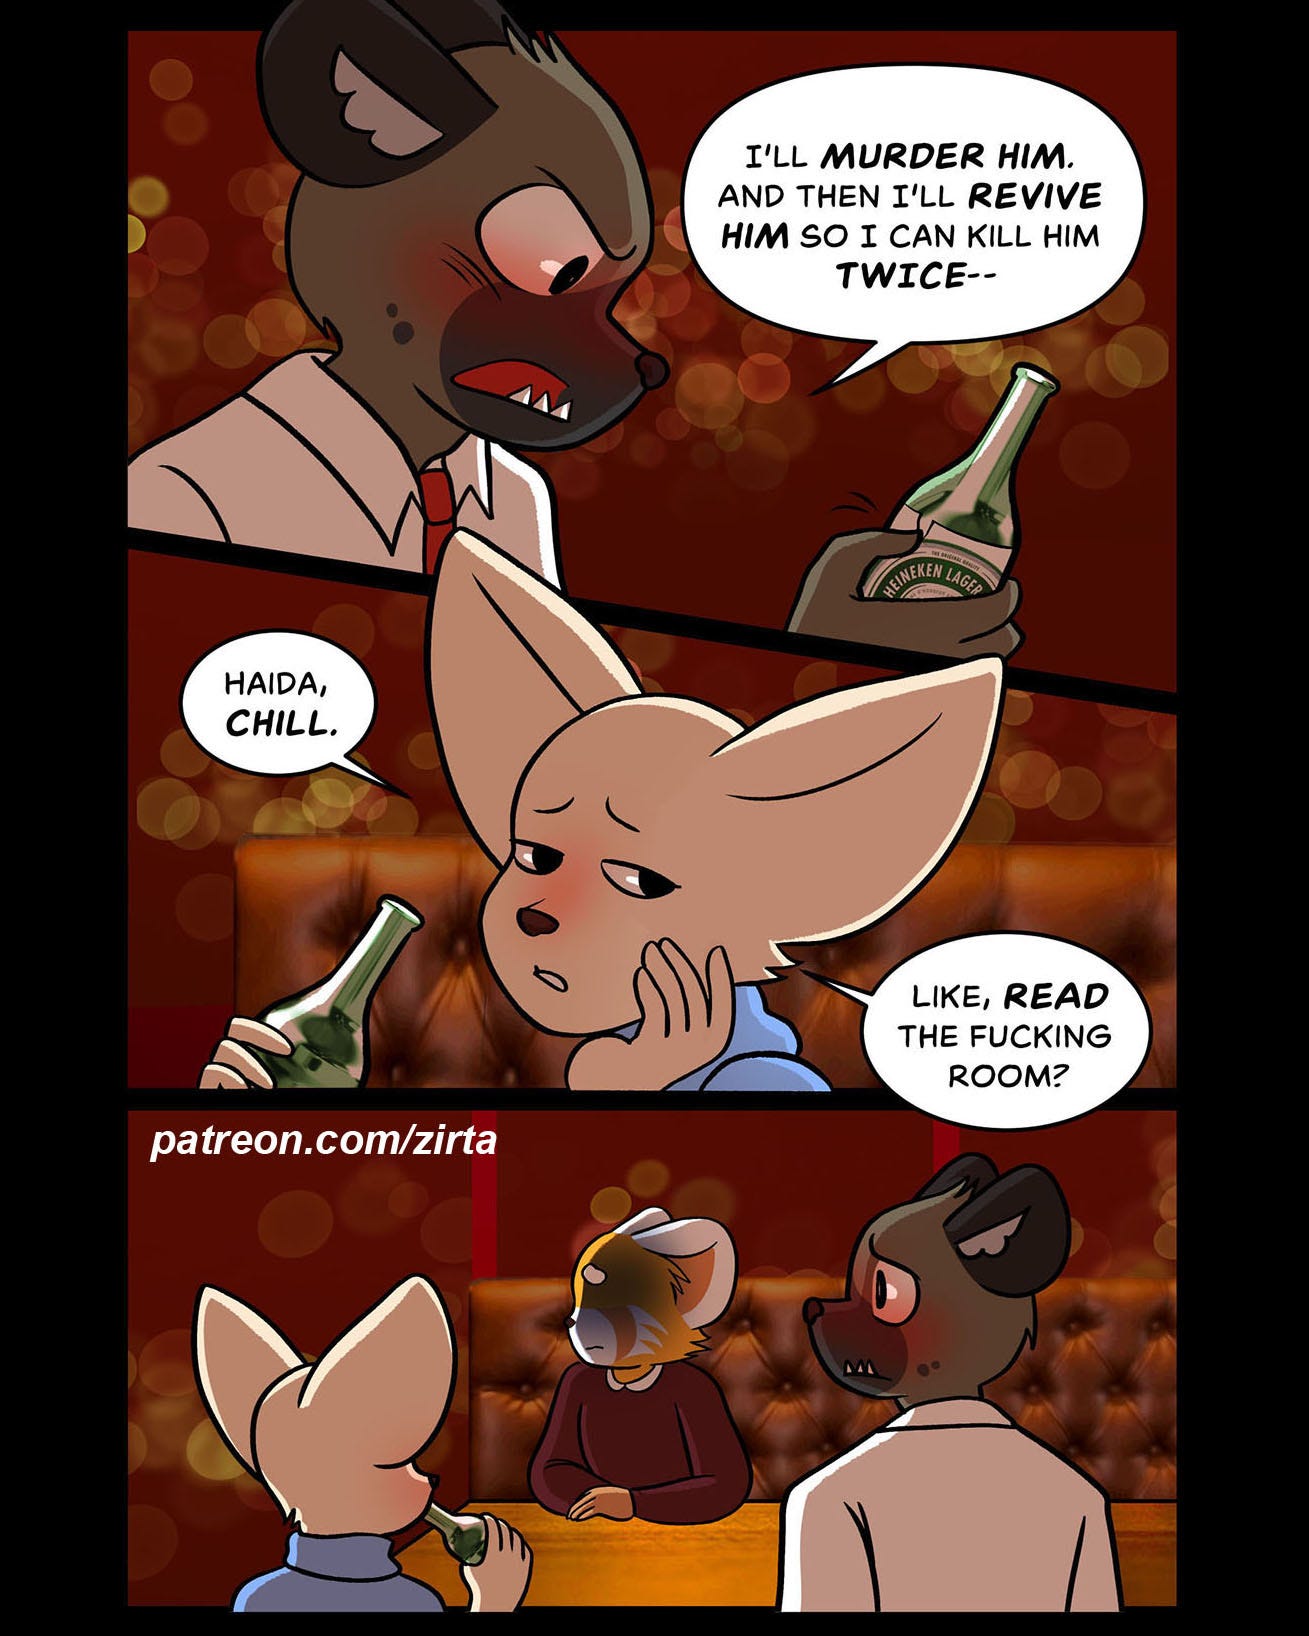 May be an image of text that says 'I'LL MURDER HIM. AND THEN I'LL REVIVE HIM so CAN KILL HIM TWICE-- HAIDA, CHILL. NEKLAGED LIKE, READ THE FUCKING ROOM? patreon.com/zirta'